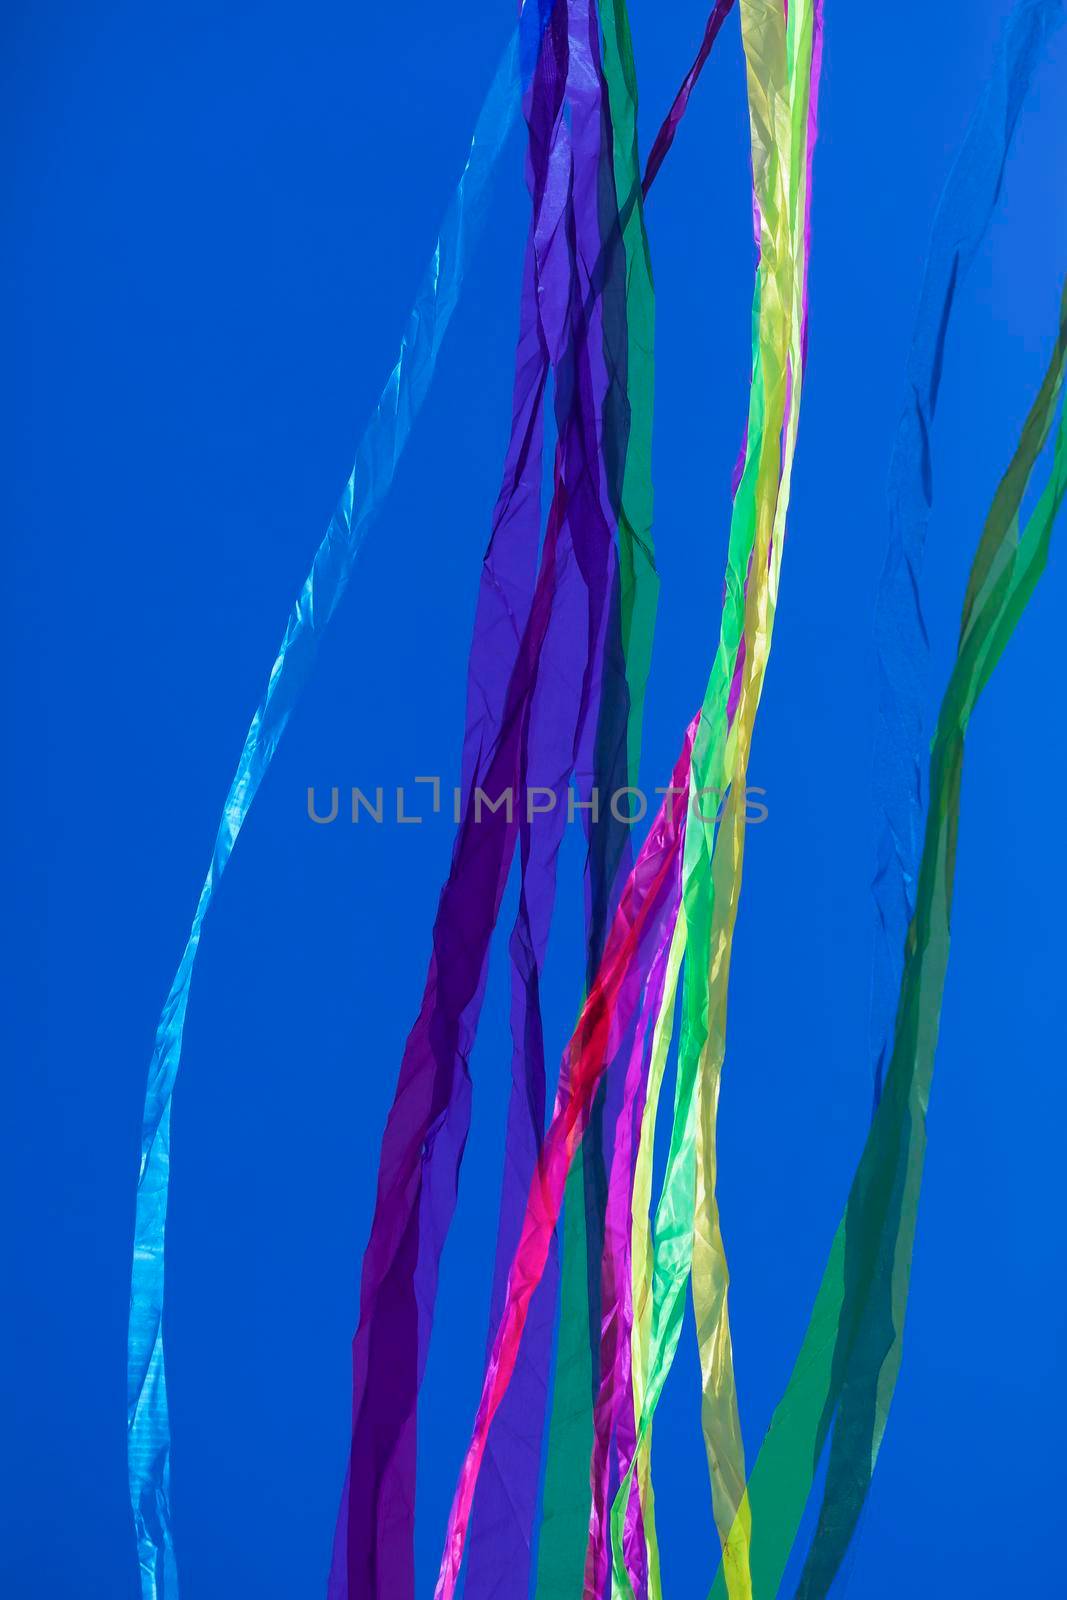 Colored ribbons and lines, floating on a plain background. by alvarobueno